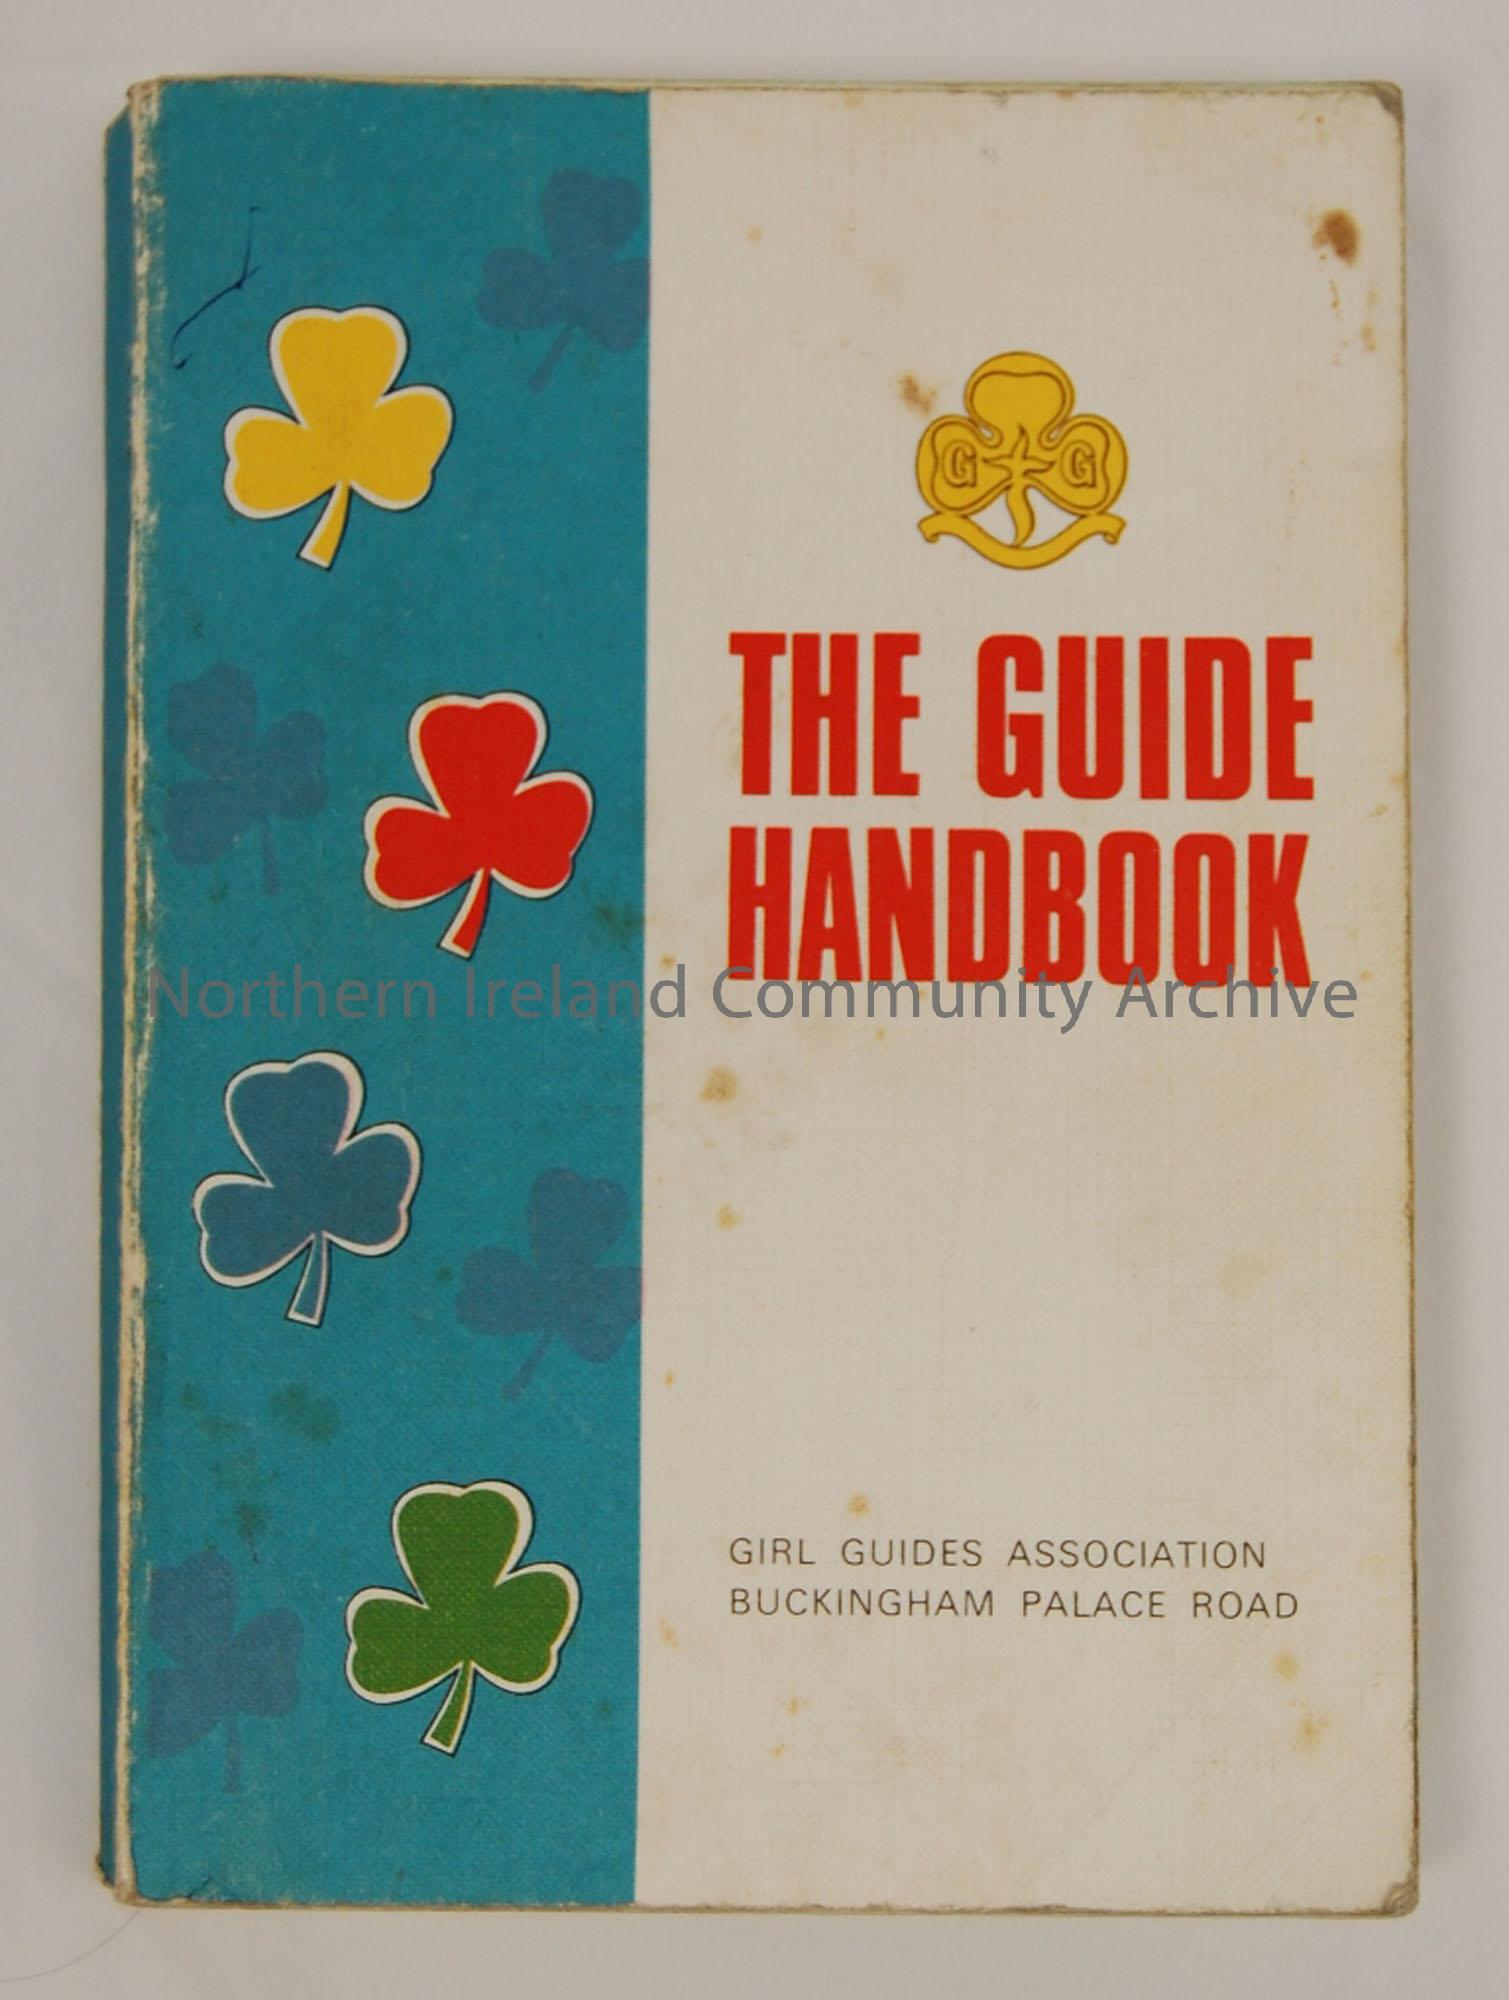 Girl Guide Association. The Guide Handbook second edition. 1976. Price 65p